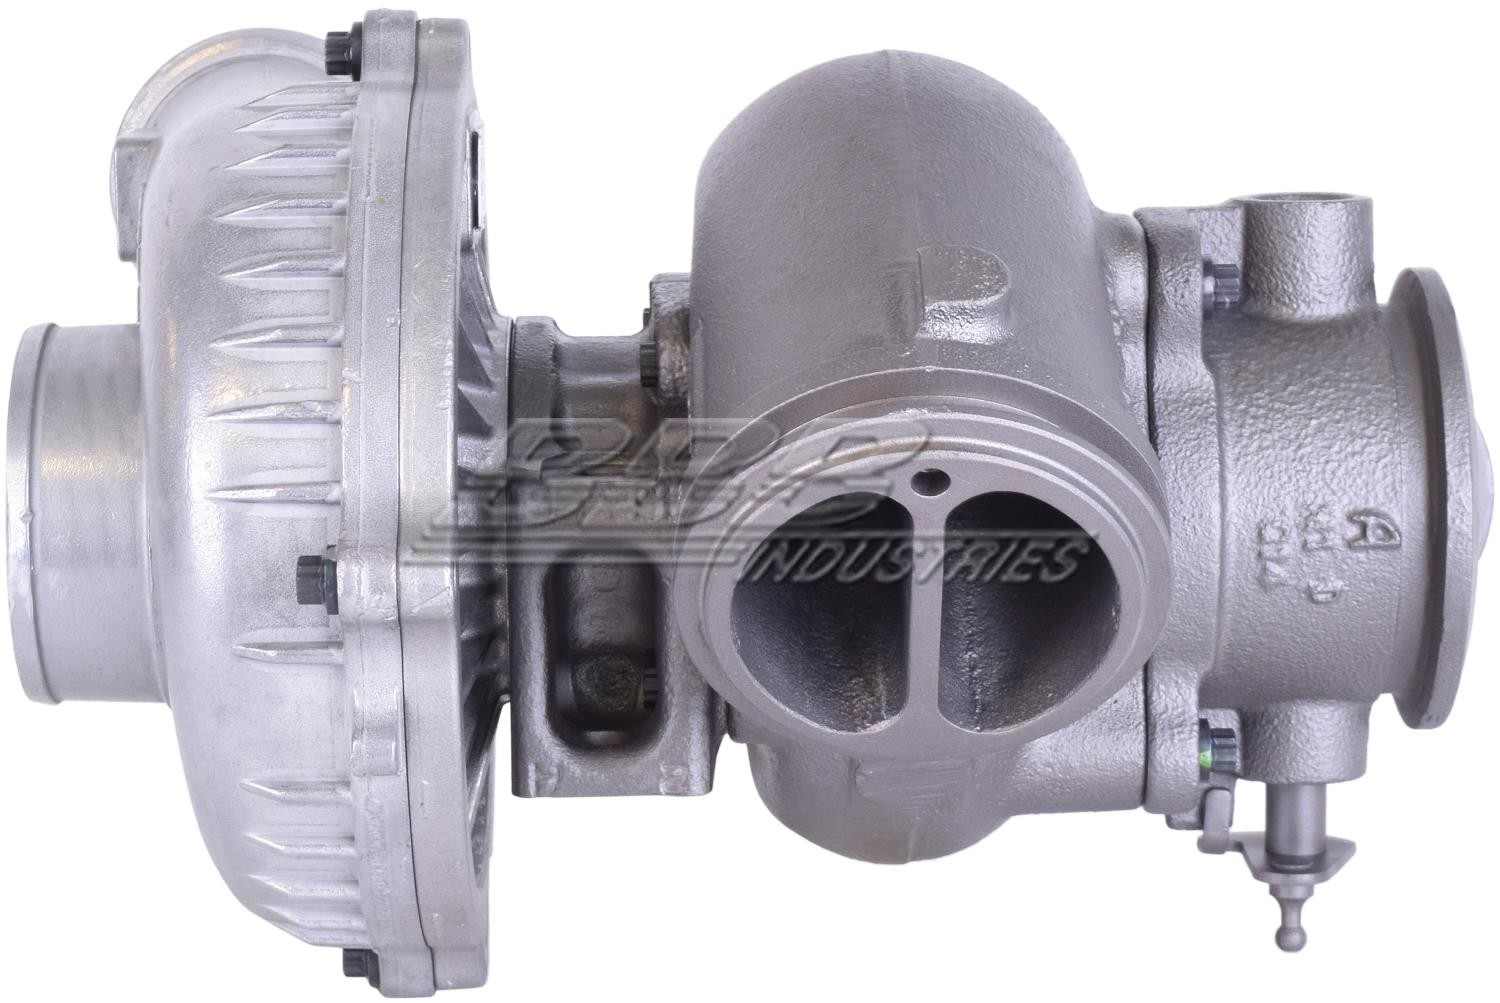 OE-TurboPower Remanufactured Turbocharger  top view frsport D1009